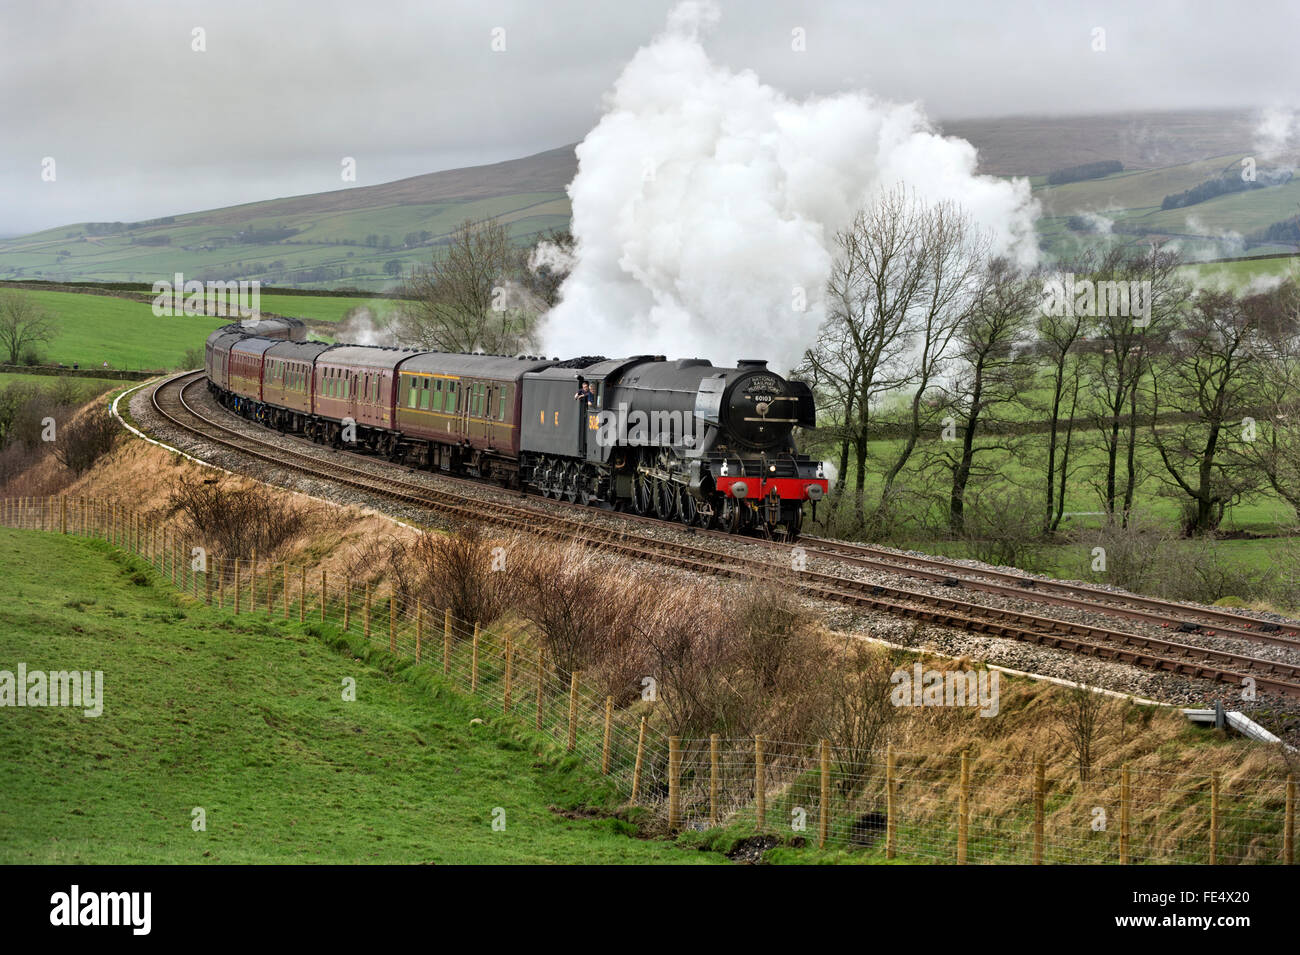 Clapham, North Yorkshire, UK, 4th February 2016. The Flying Scotsman steam locomotive on a test run, with a full load of coaches, in preparation for taking a train of passengers over the Settle-Carlisle railway line this coming Saturday. The train is seen near Clapham in North Yorkshire. Credit:  John Bentley/Alamy Live News Stock Photo